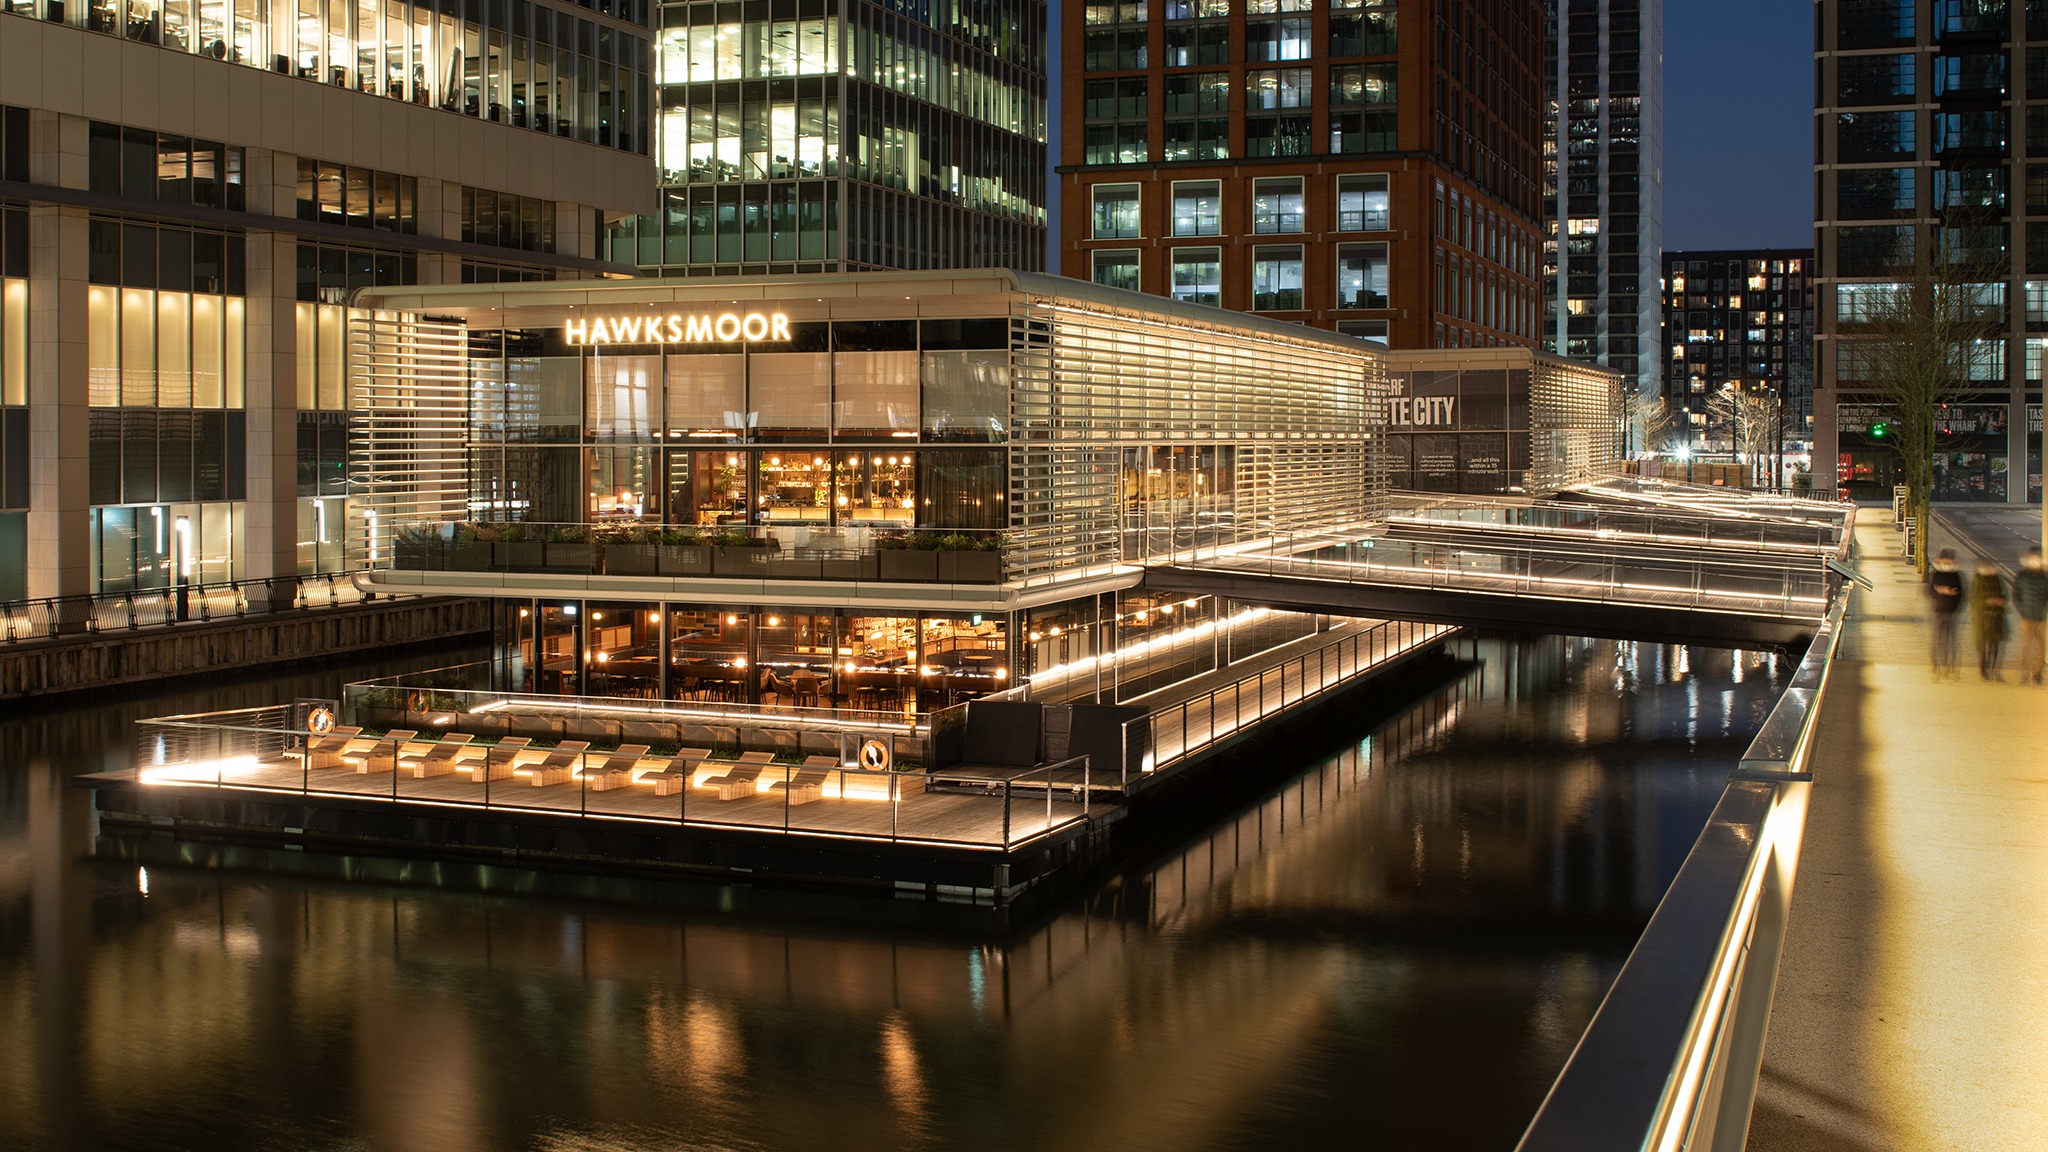 A floating restaurant and bar on three levels in Canary Wharf, with skyscrapers all around, at night.